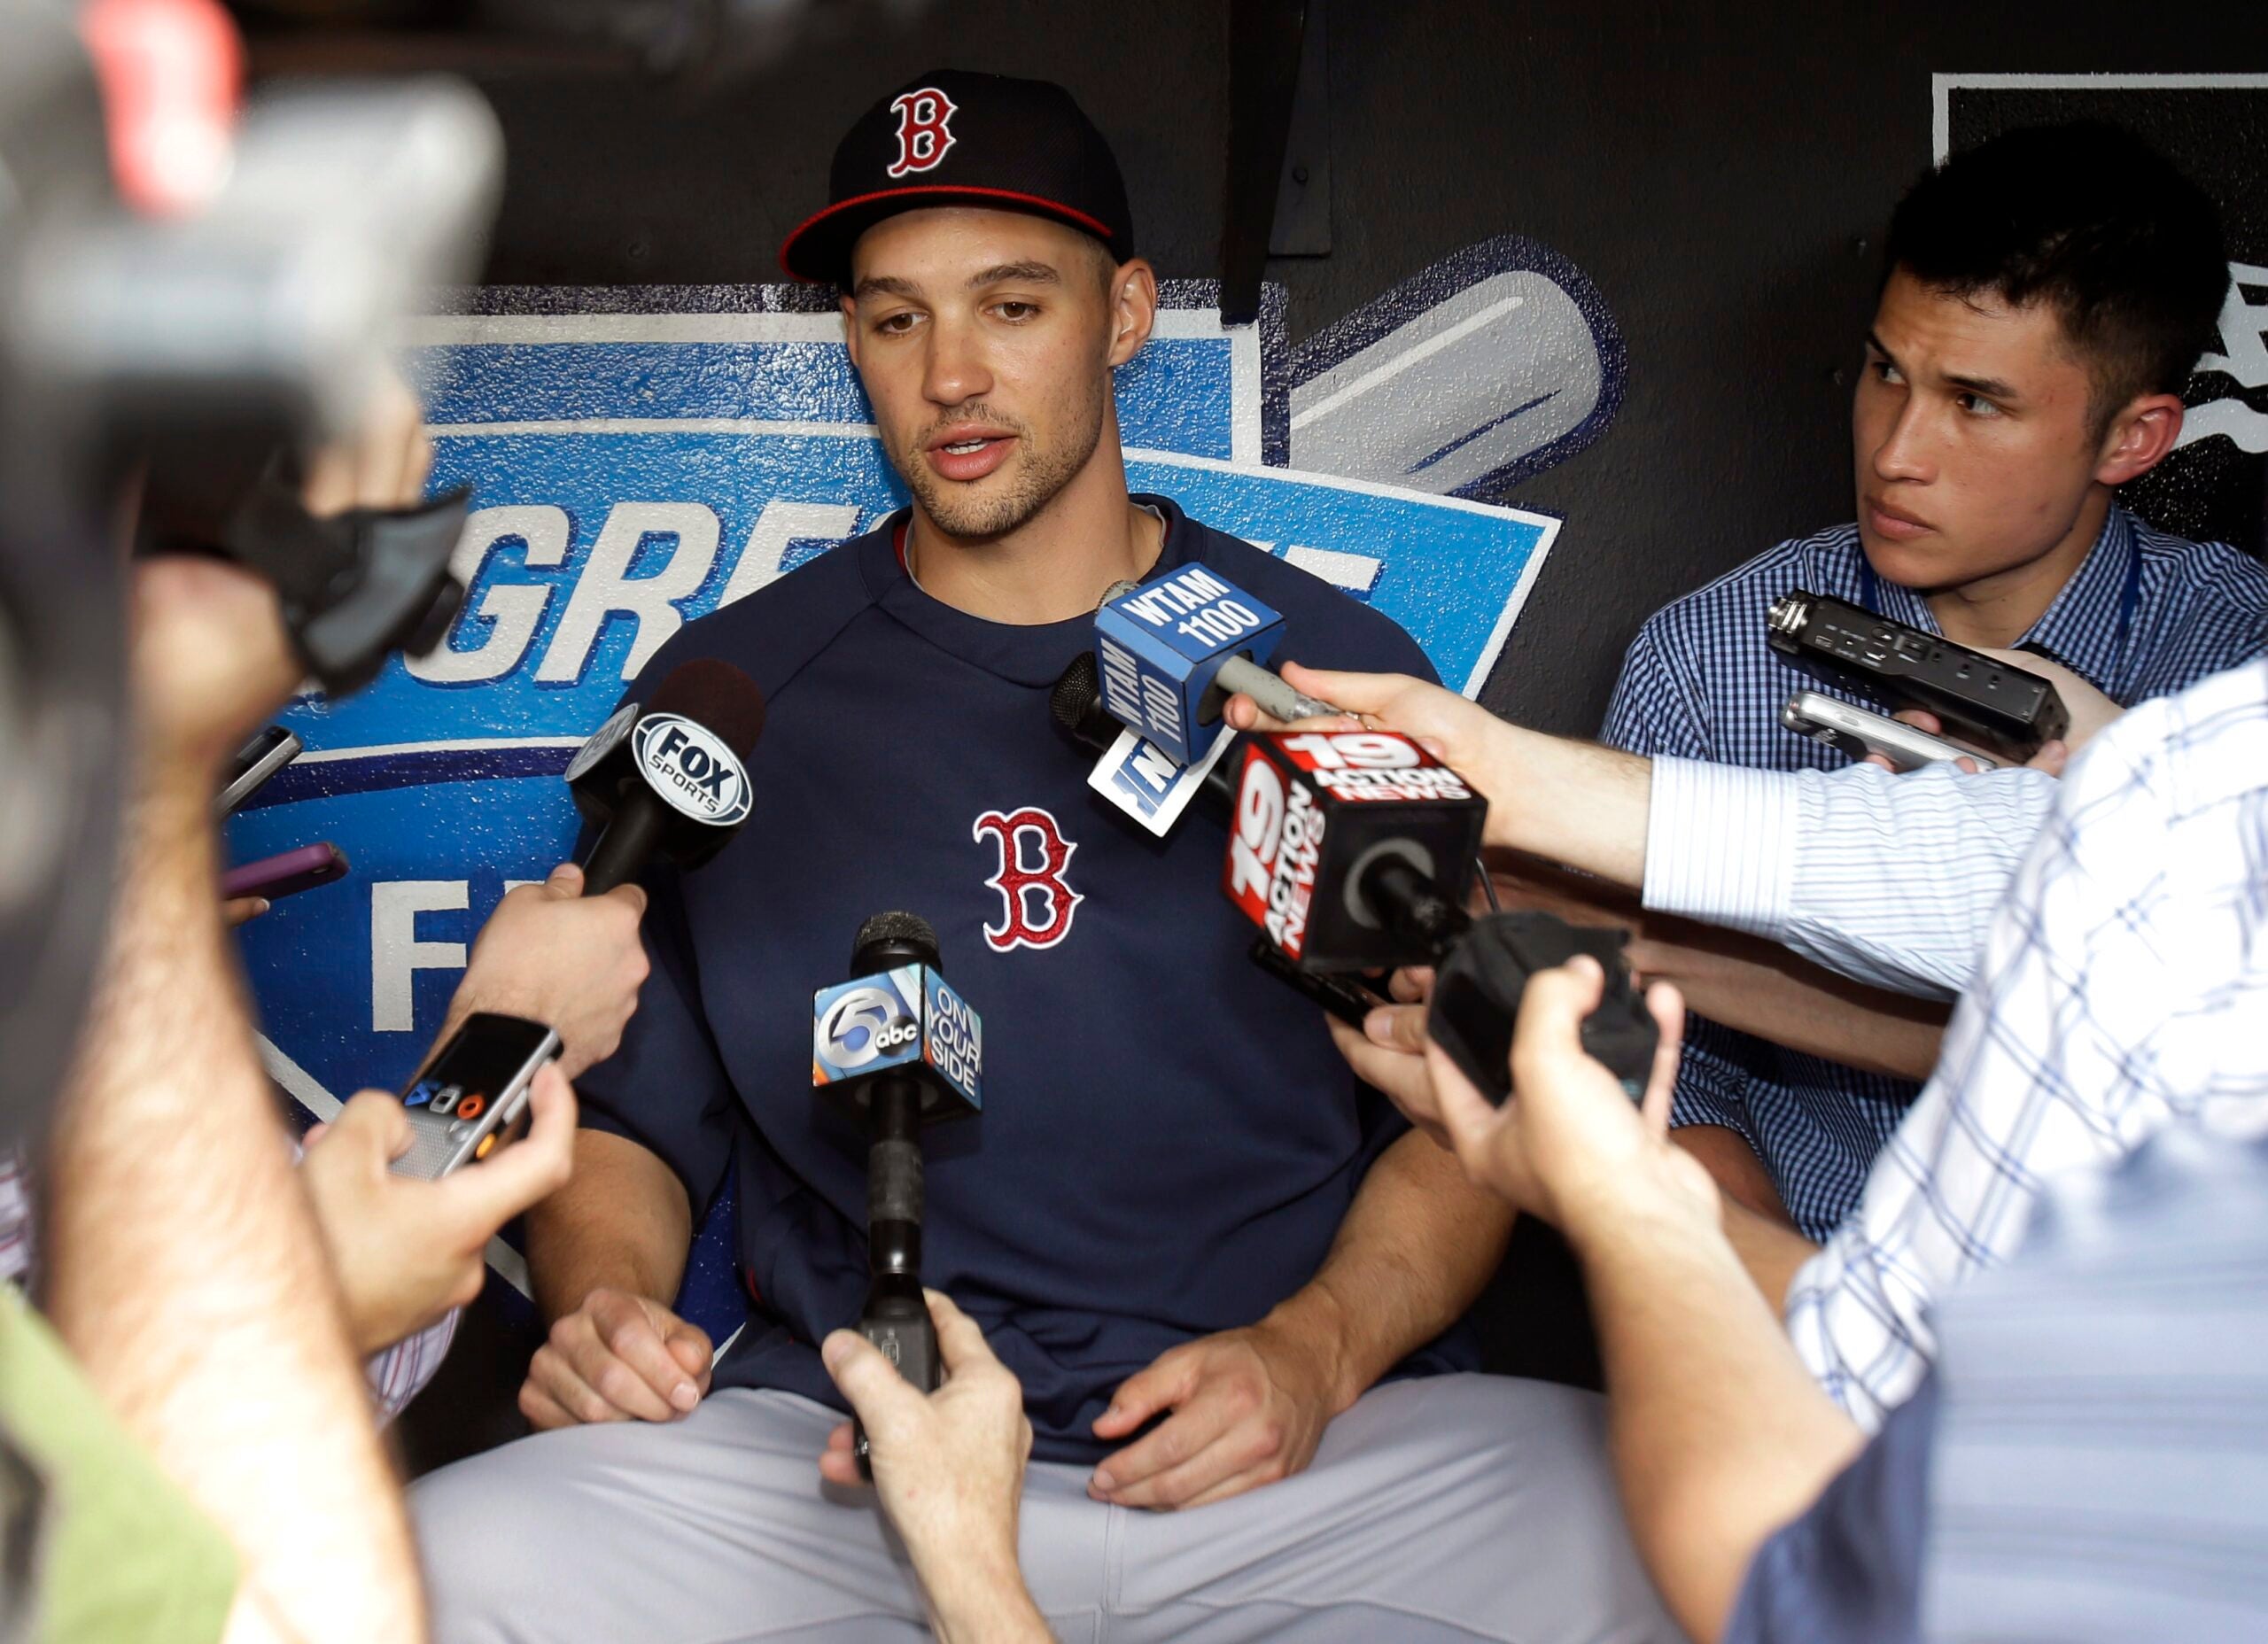 With hot Twins on deck, Red Sox are ready for a big test - The